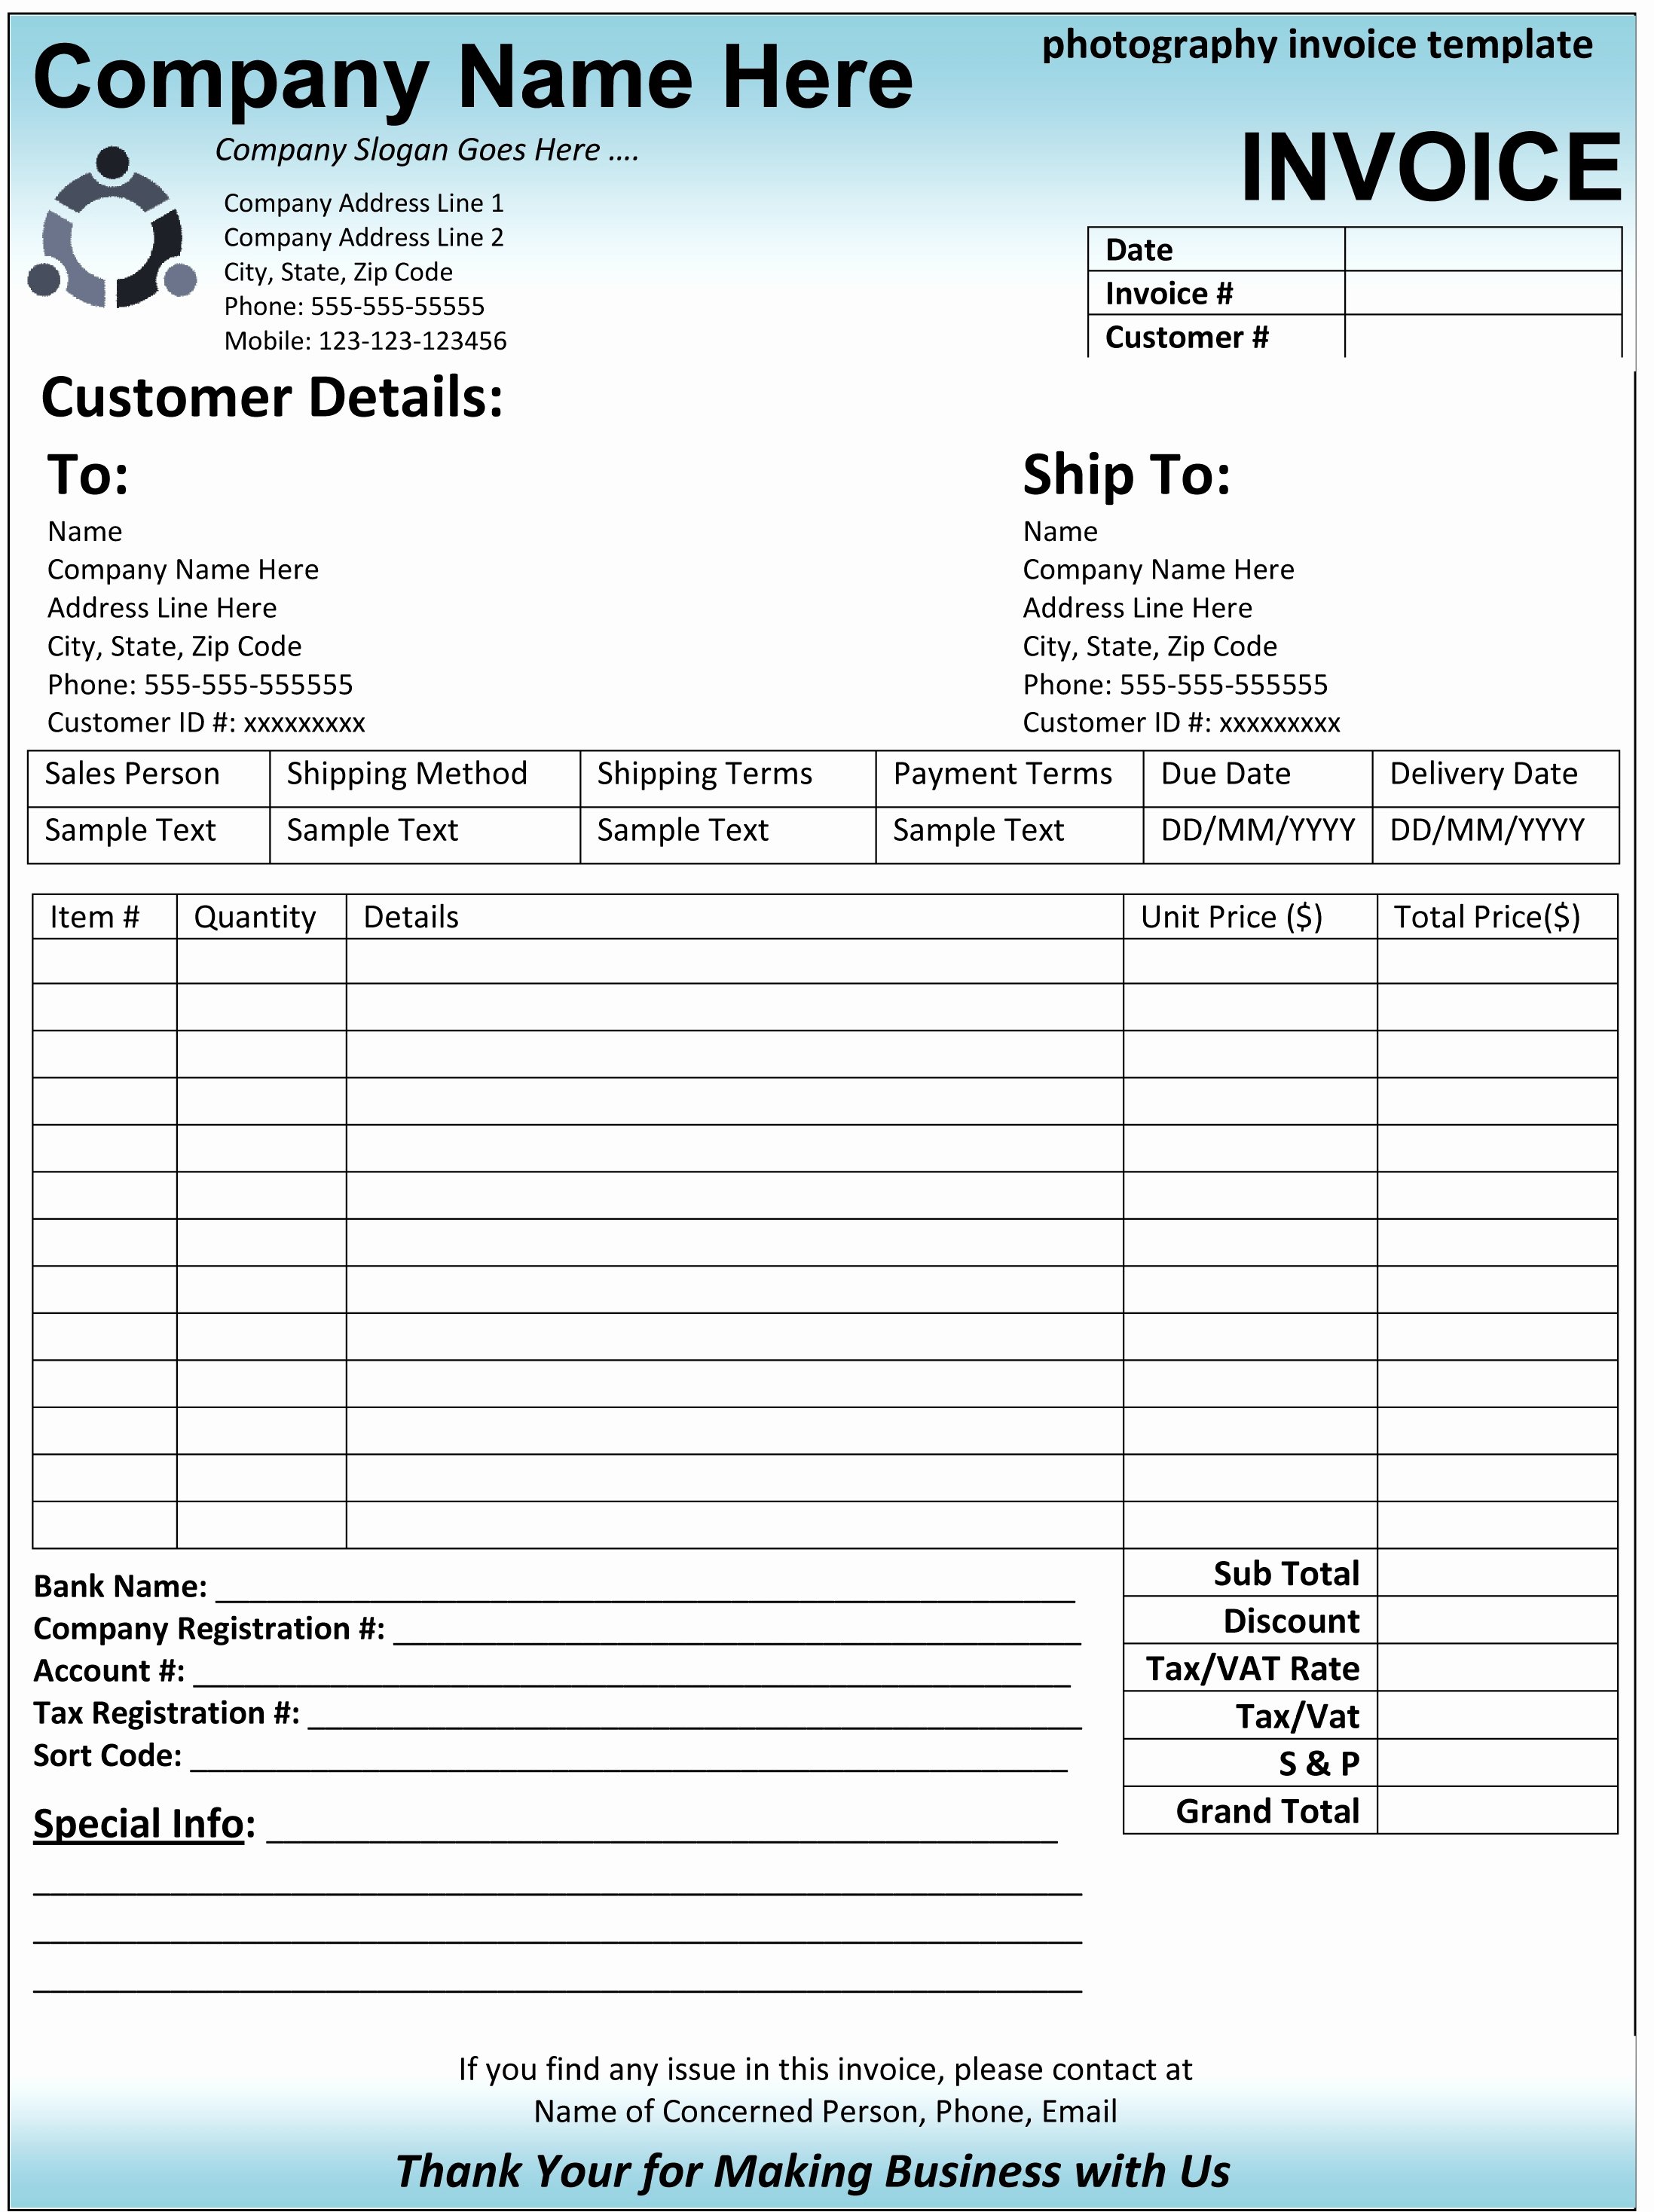 Sample Invoice Template Excel Luxury Invoice Template Excel Mac